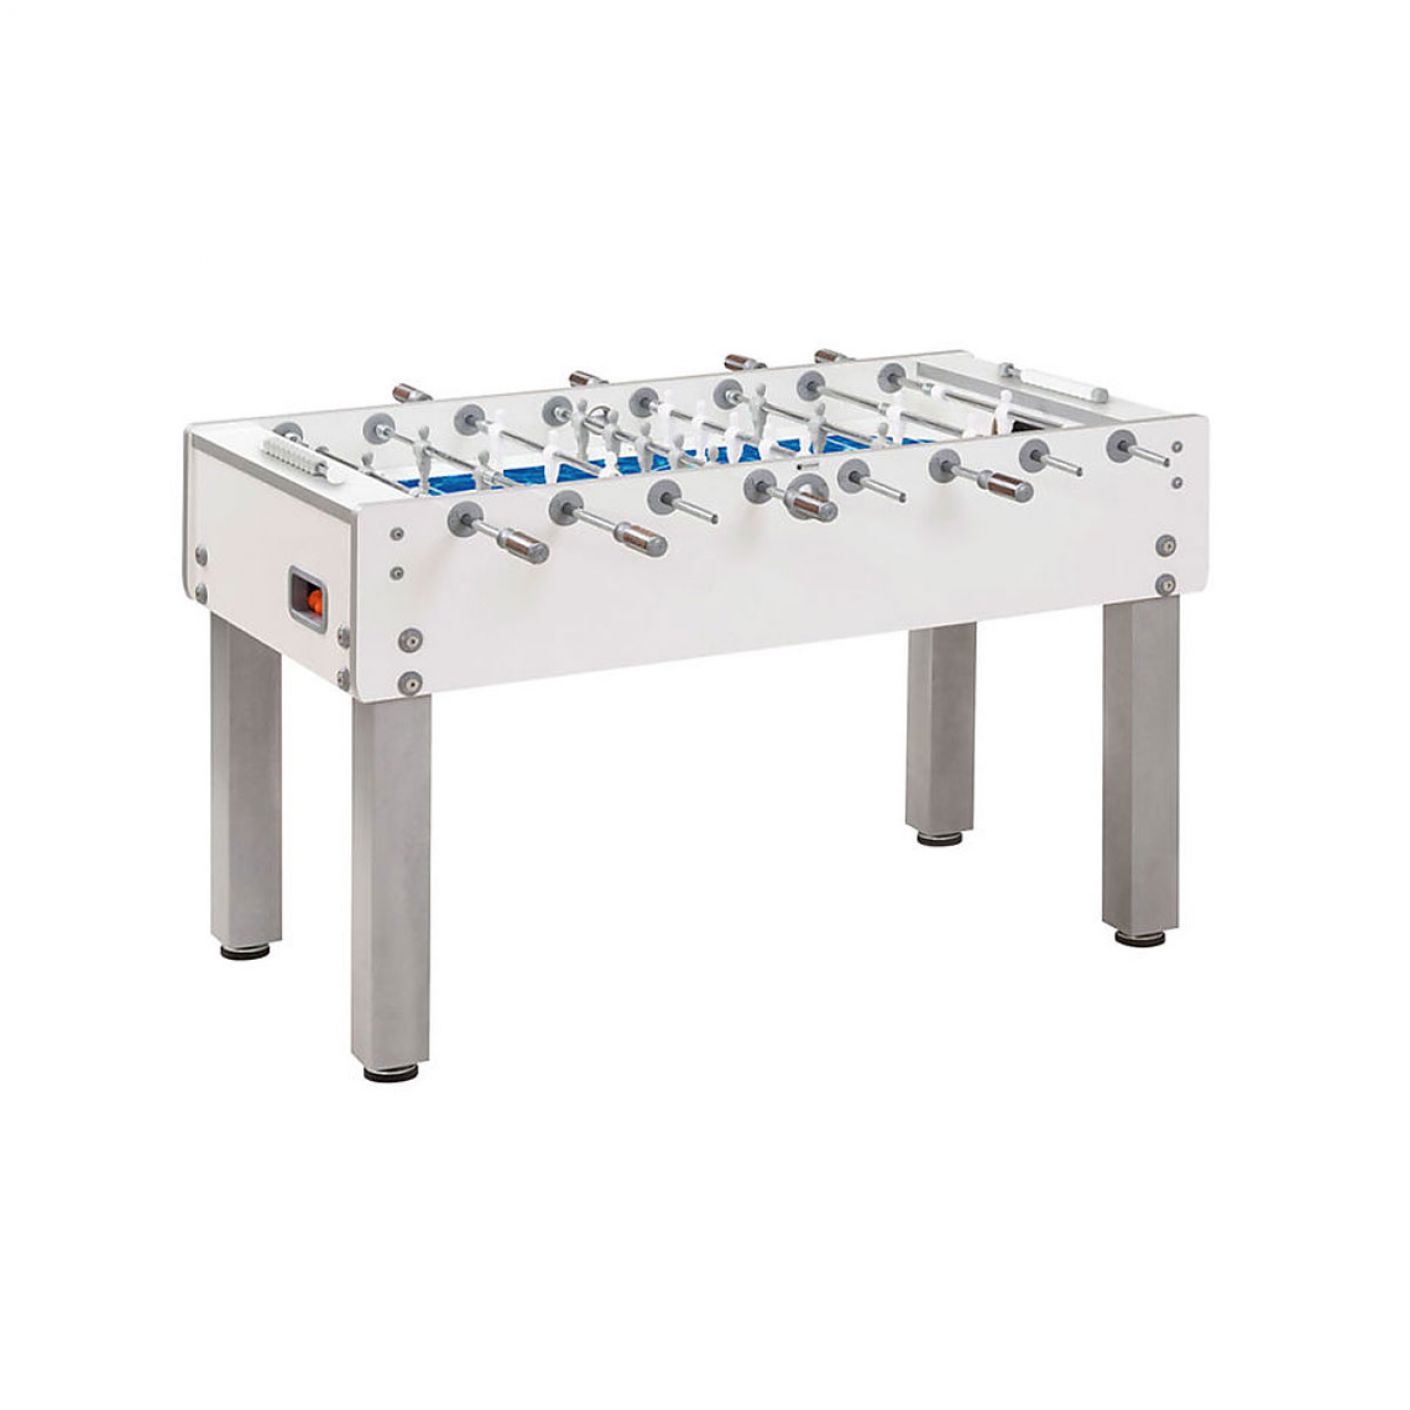 Garlando Soccer Table G-500 PURE WHITE H2O with outgoing rods